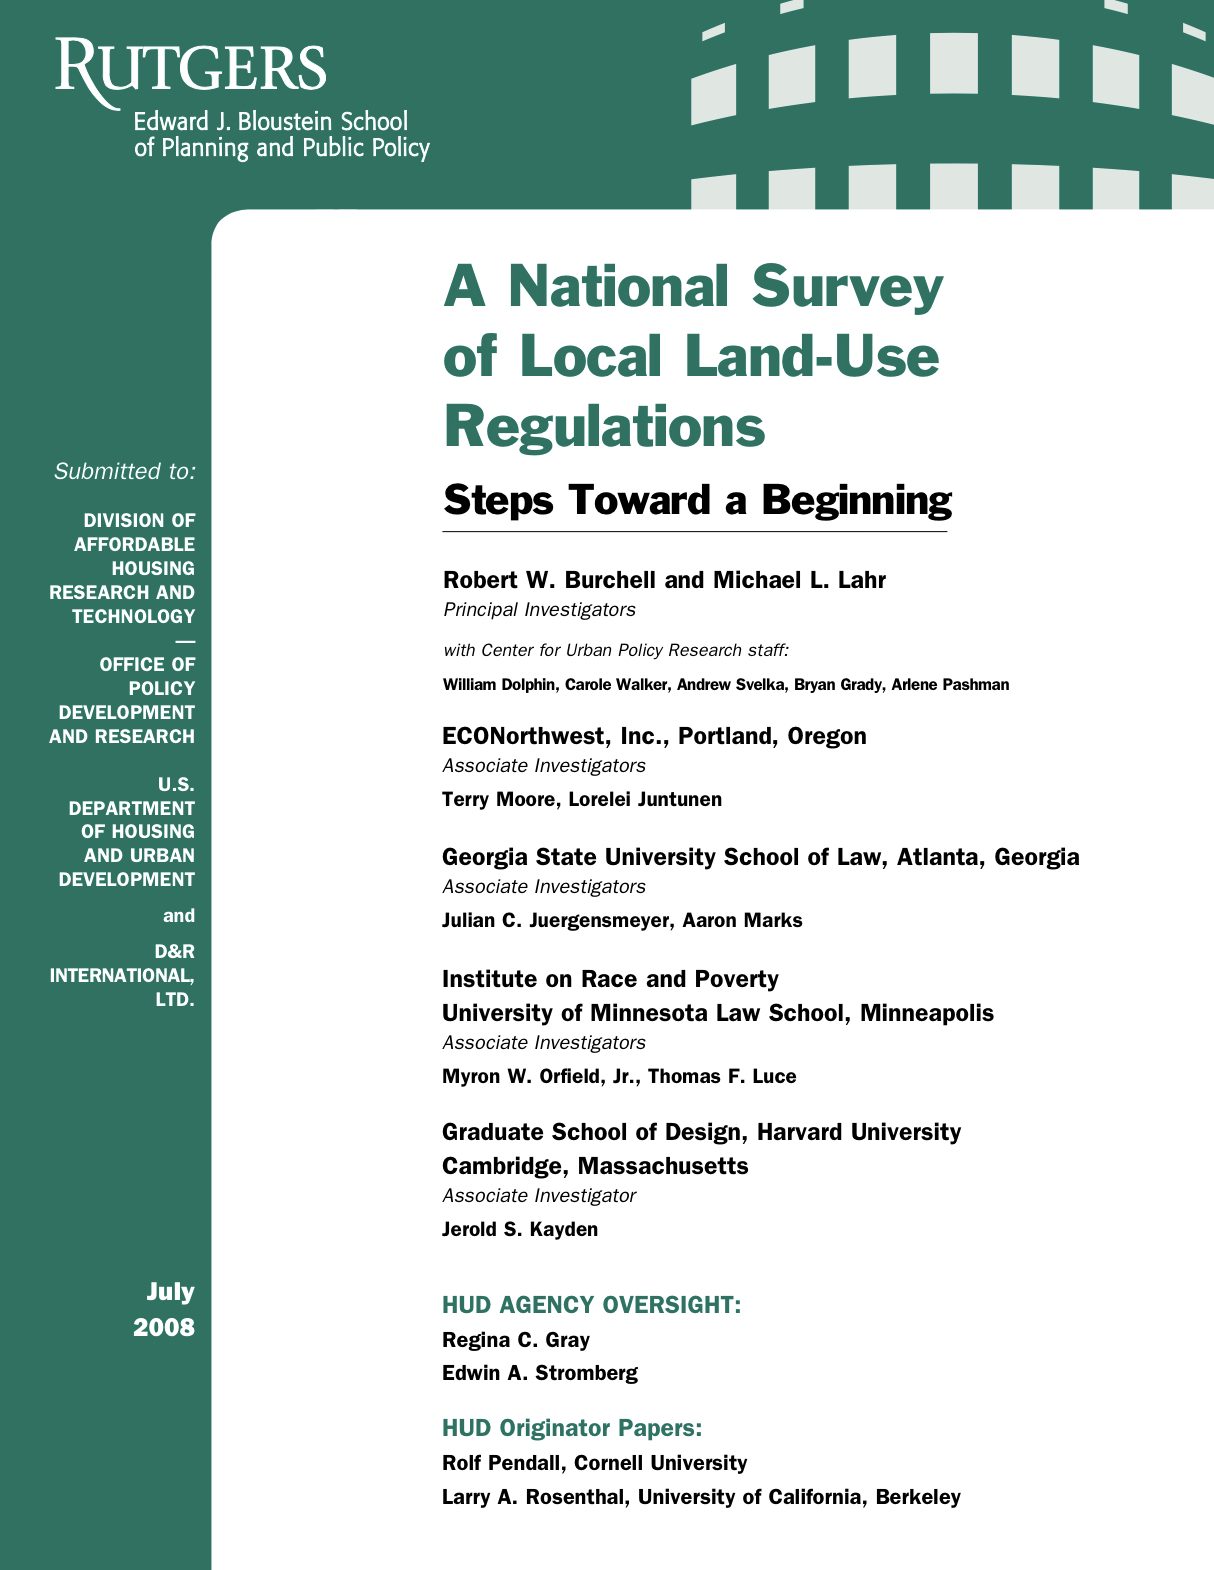 A National Survey of Local Land-Use Regulations